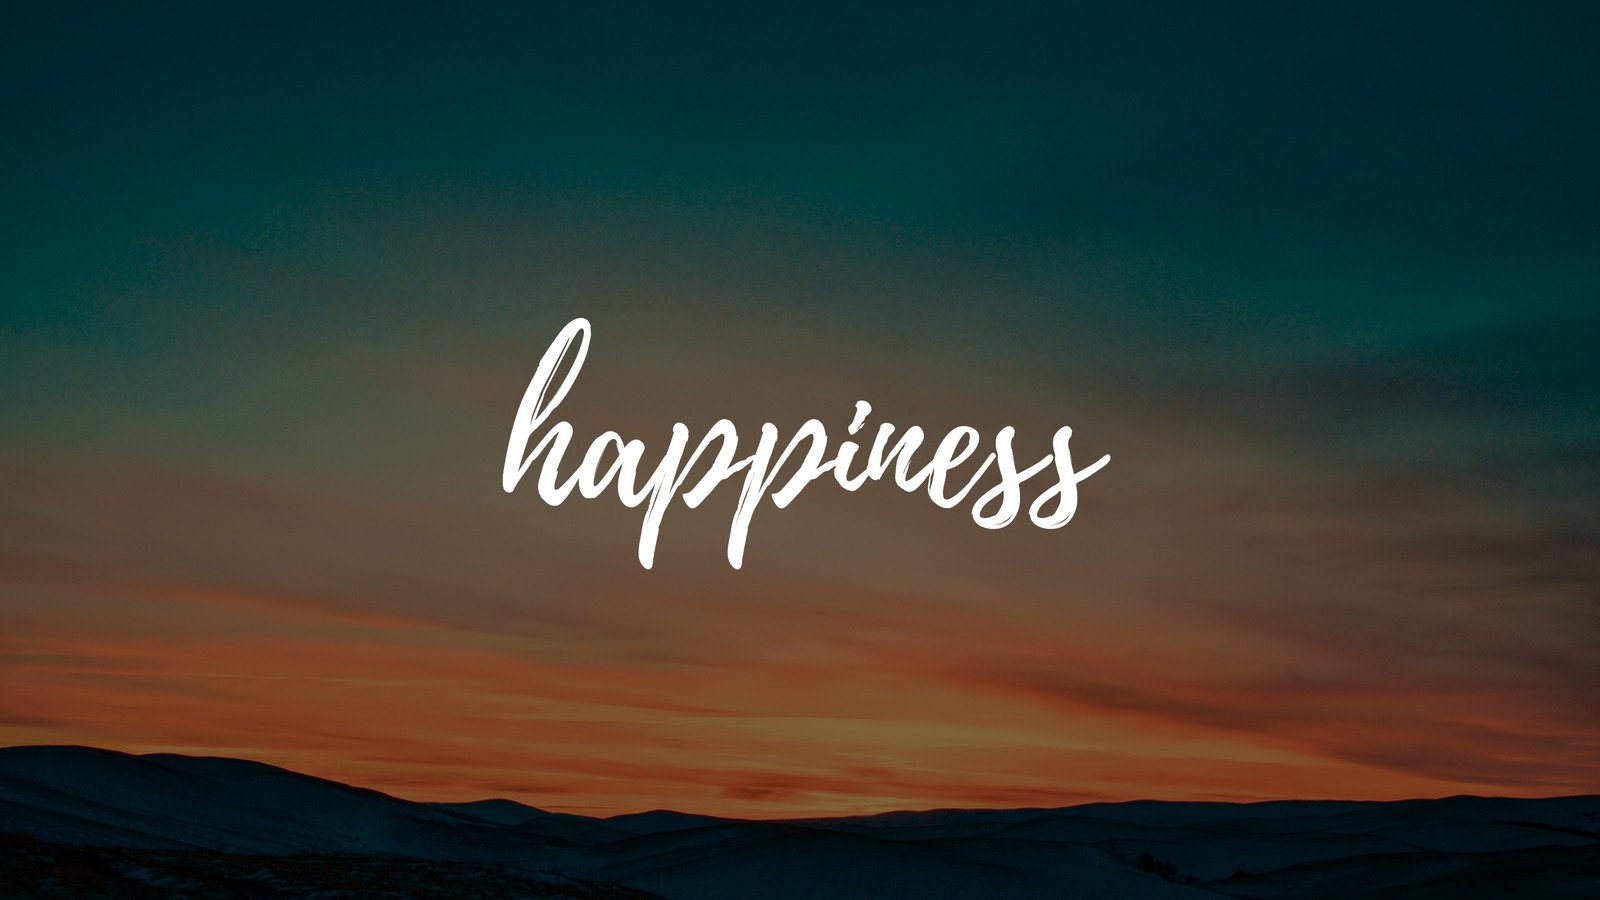 Best 500+ Happiness Pictures | Download Free Images on Unsplash